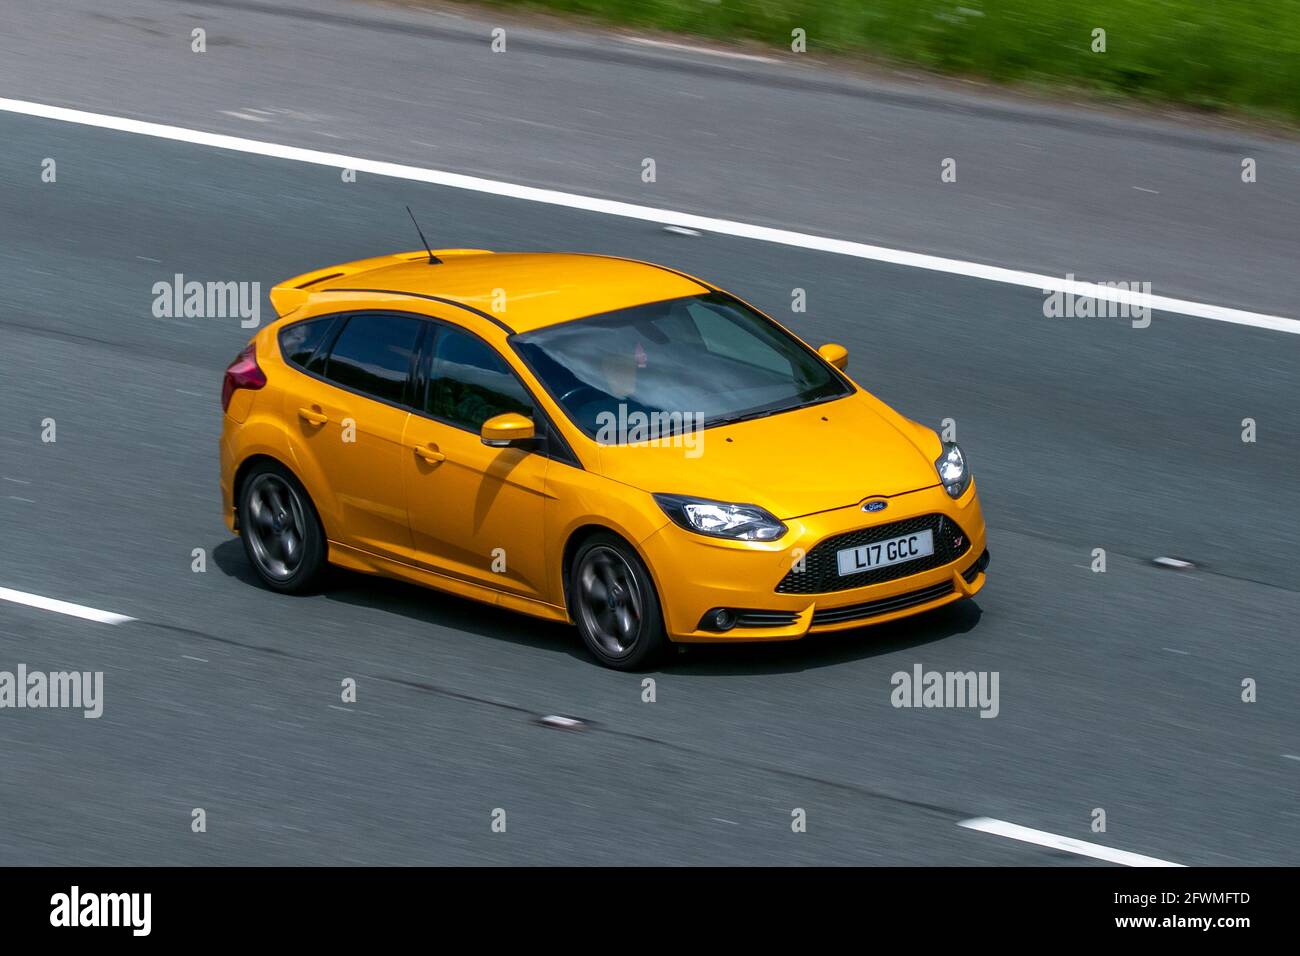 2013 yellow Ford Focus 4dr 1999cc saloon car driving on the M6 motorway near Preston in Lancashire, UK Stock Photo